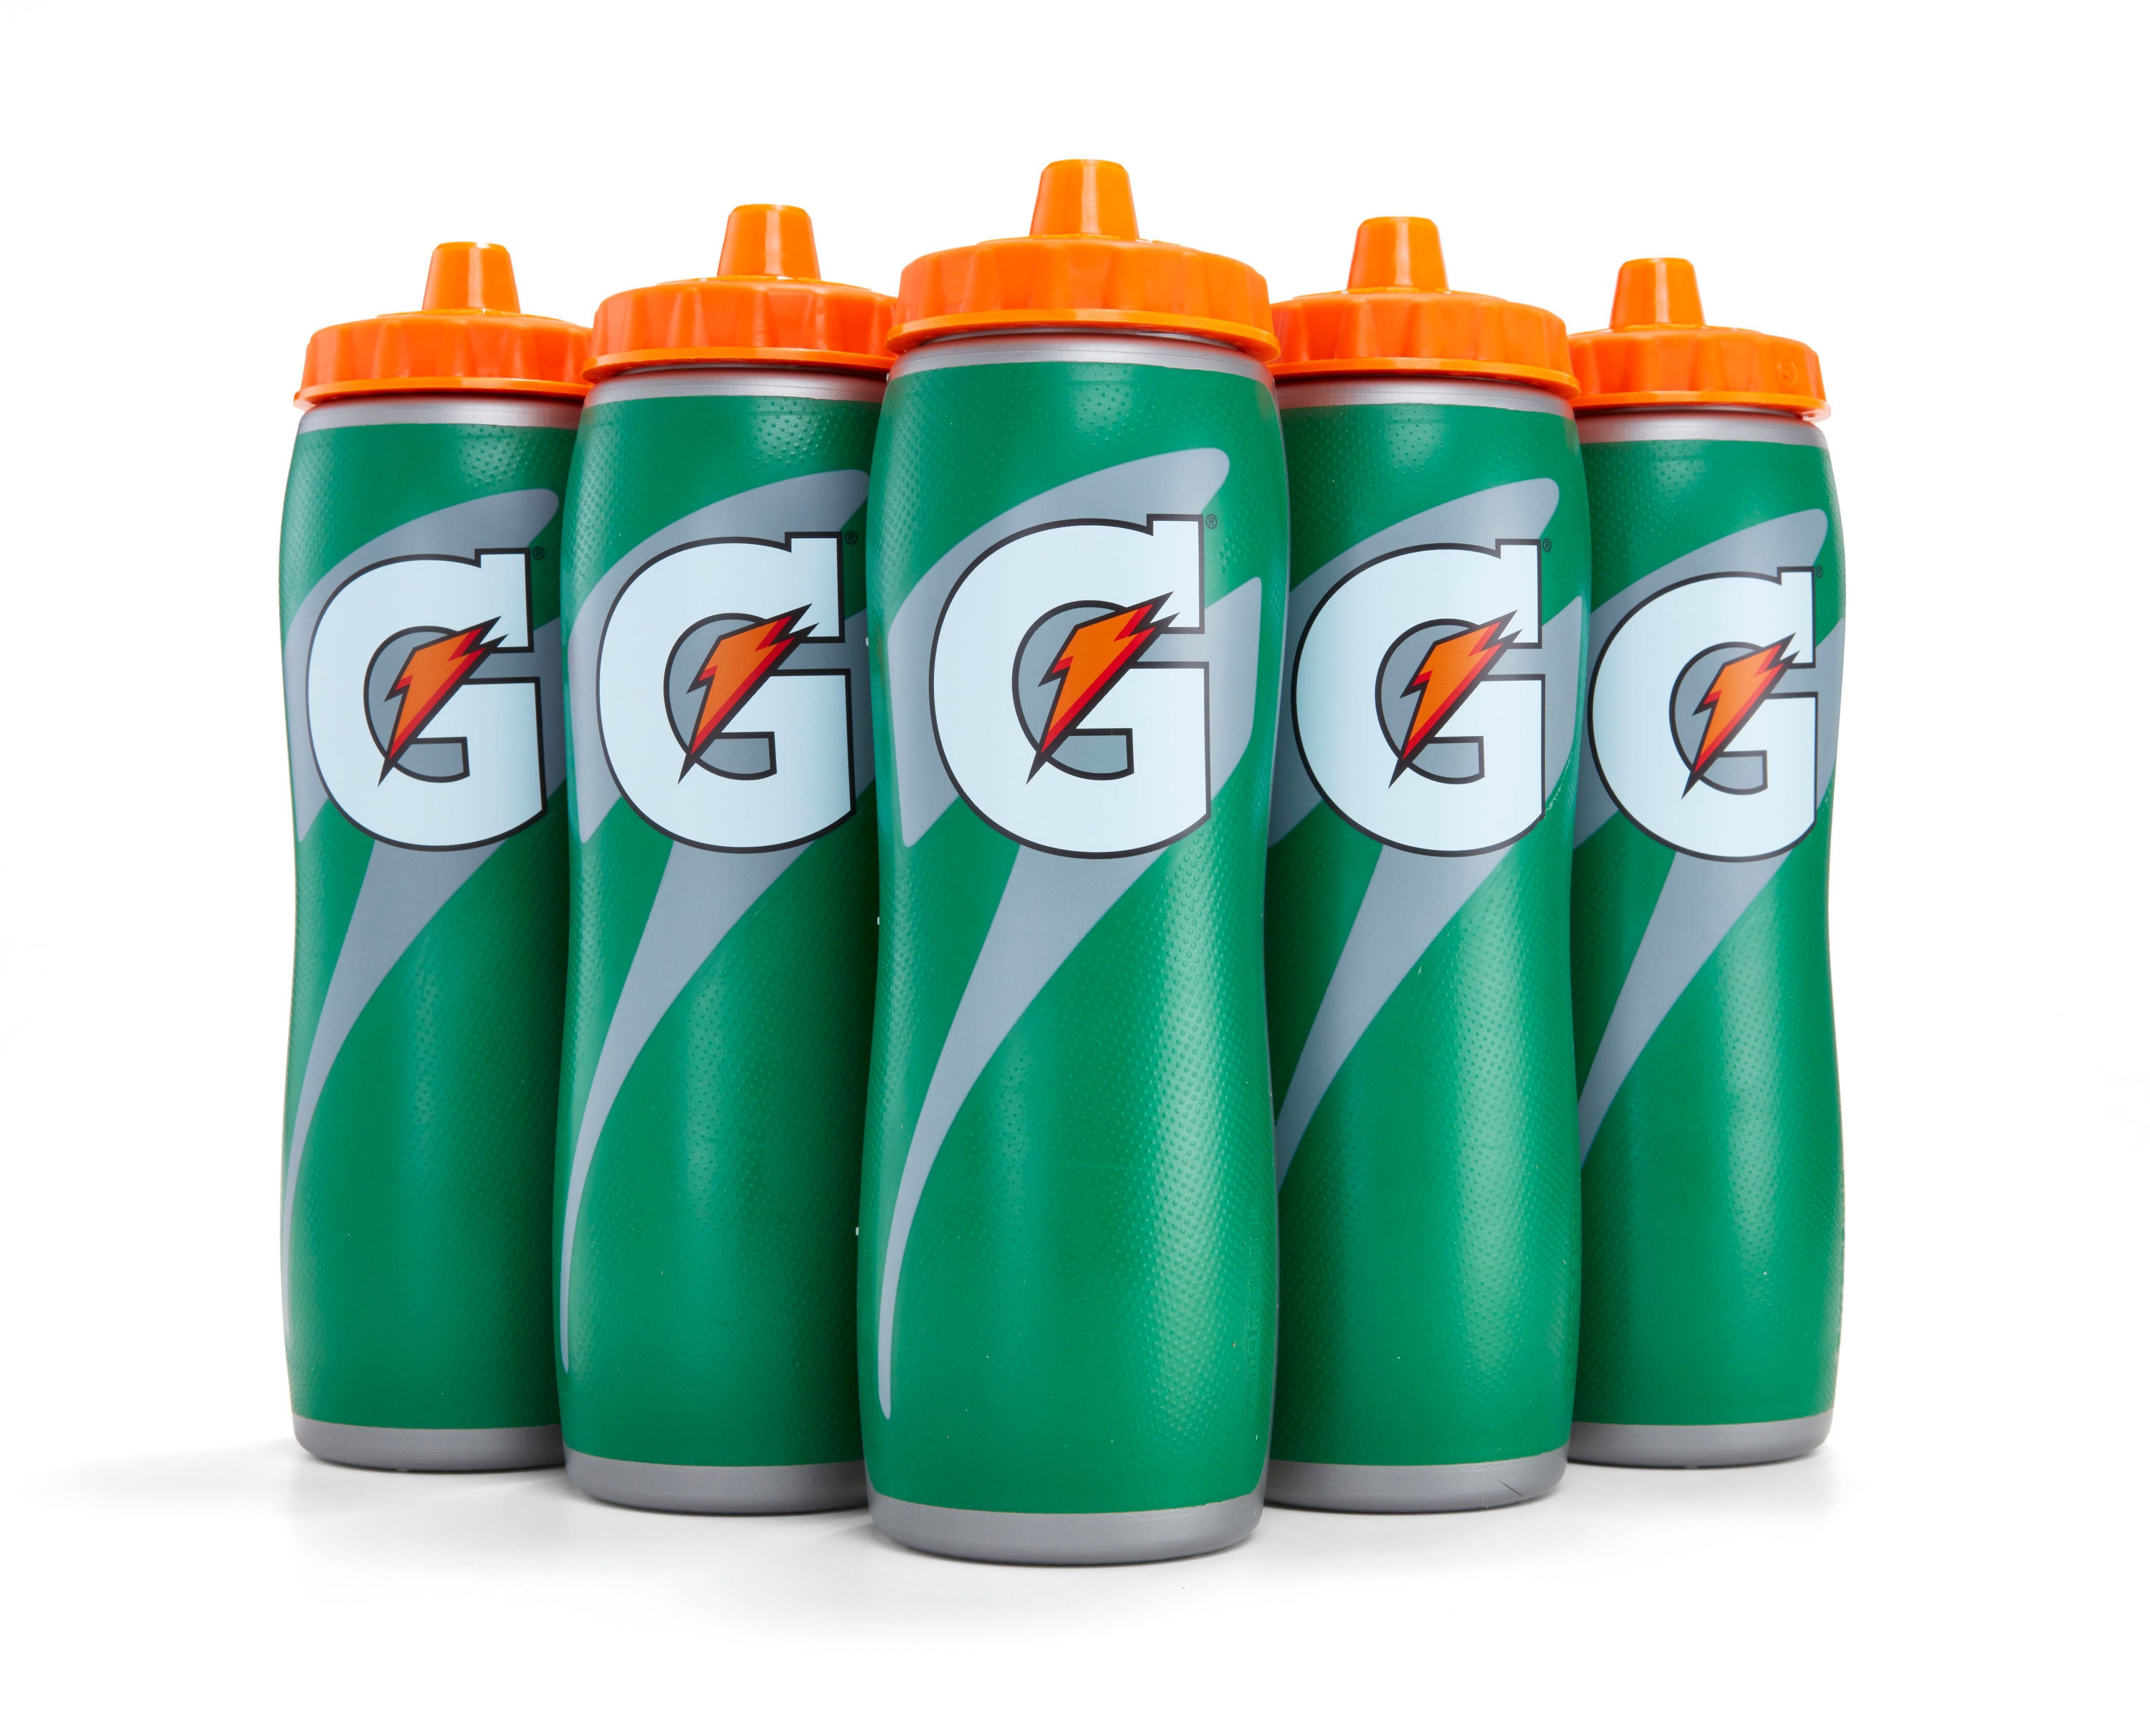 8-Pack of 4 Oz Plastic Small Squeeze Bottles and Caps